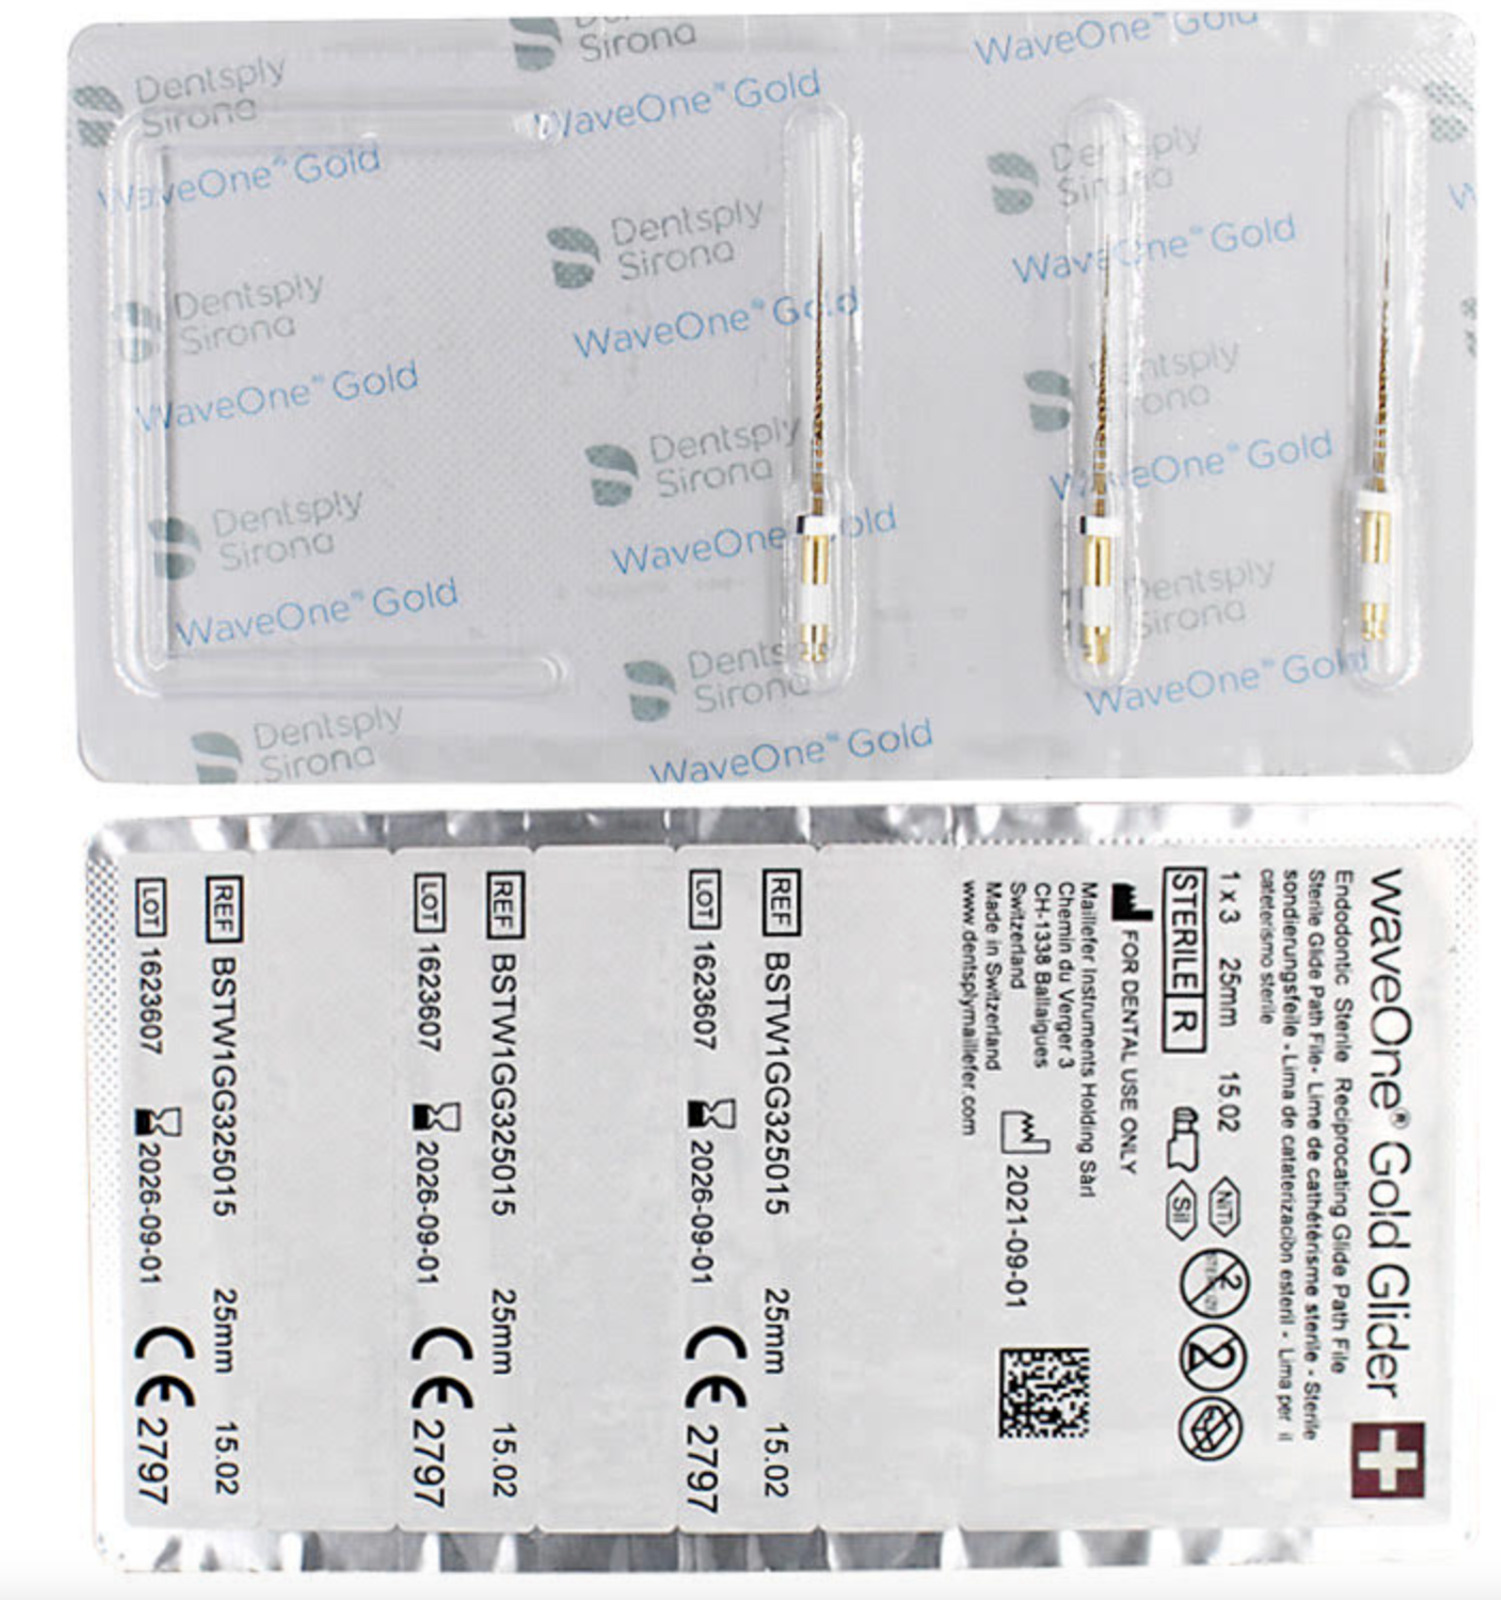 WAVE ONE Gold Glider (15.02) -  DENTSPLY  (3/pack) - All sizes  ORIGINAL